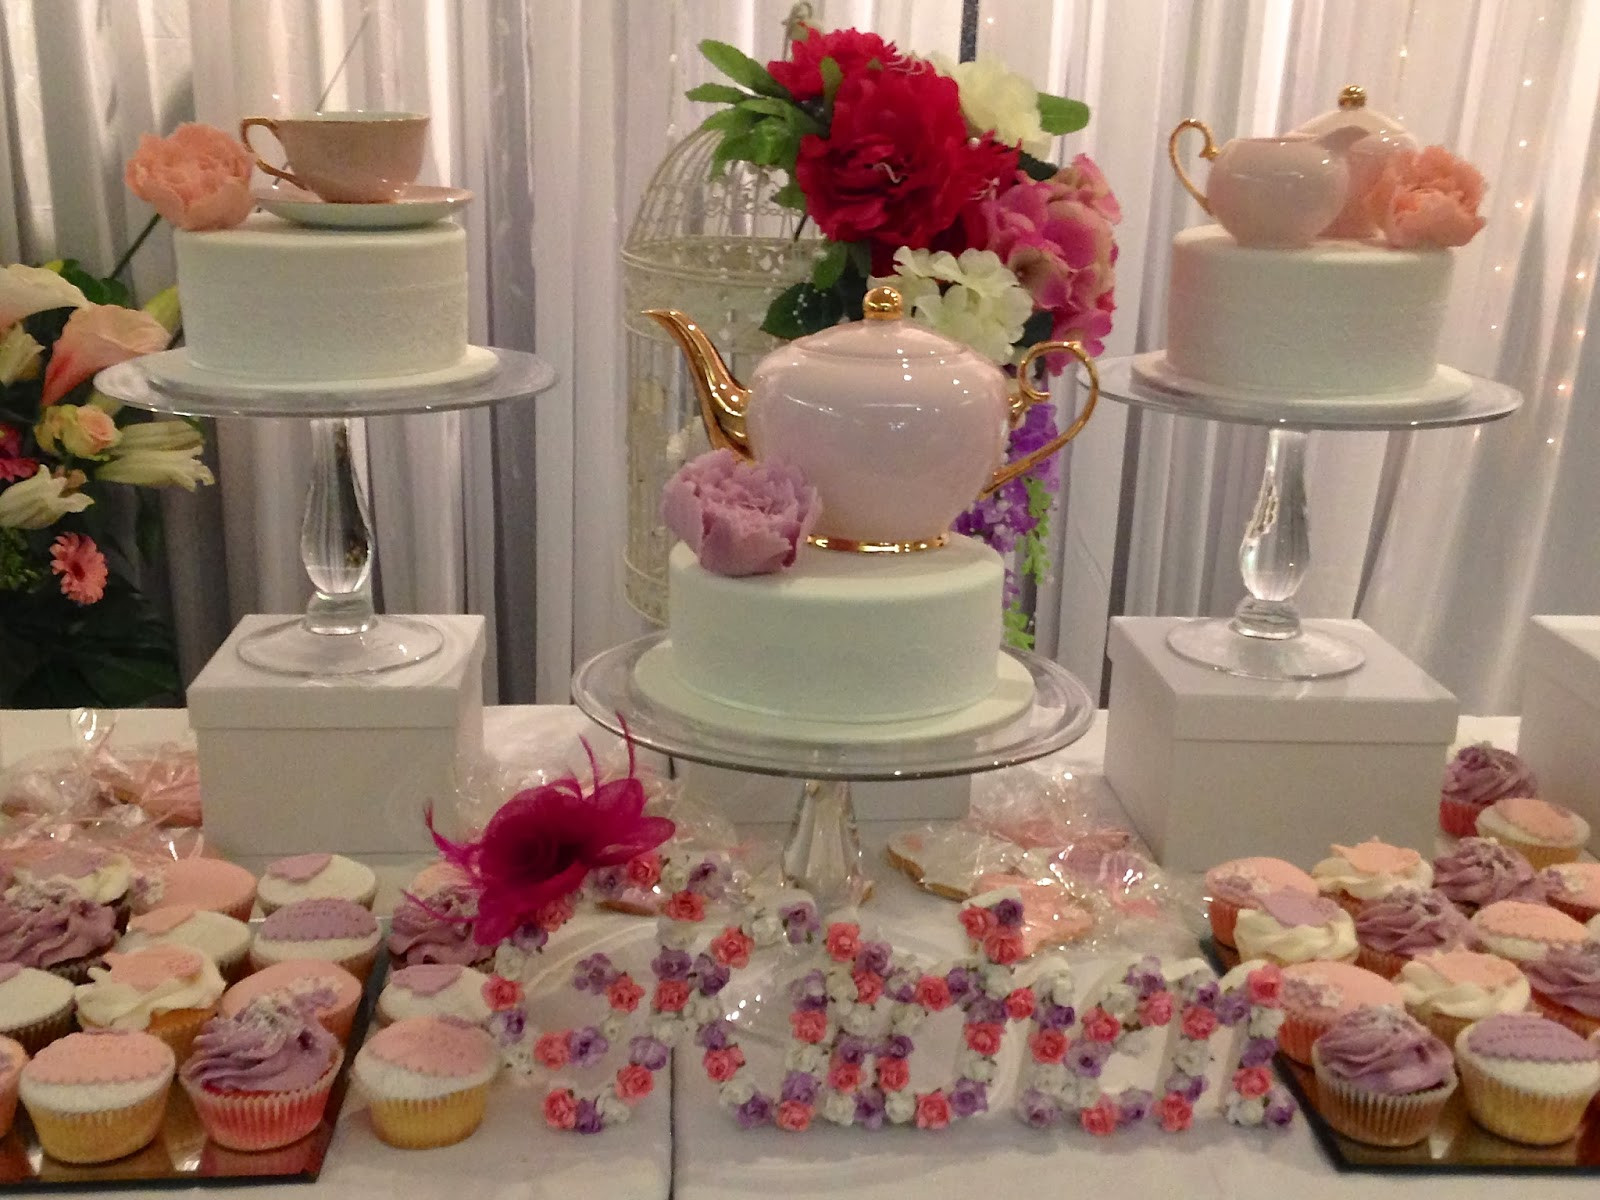 Tea Party Decorating Ideas
 Party Ideas Pretty in pink floral kitchen tea ideas